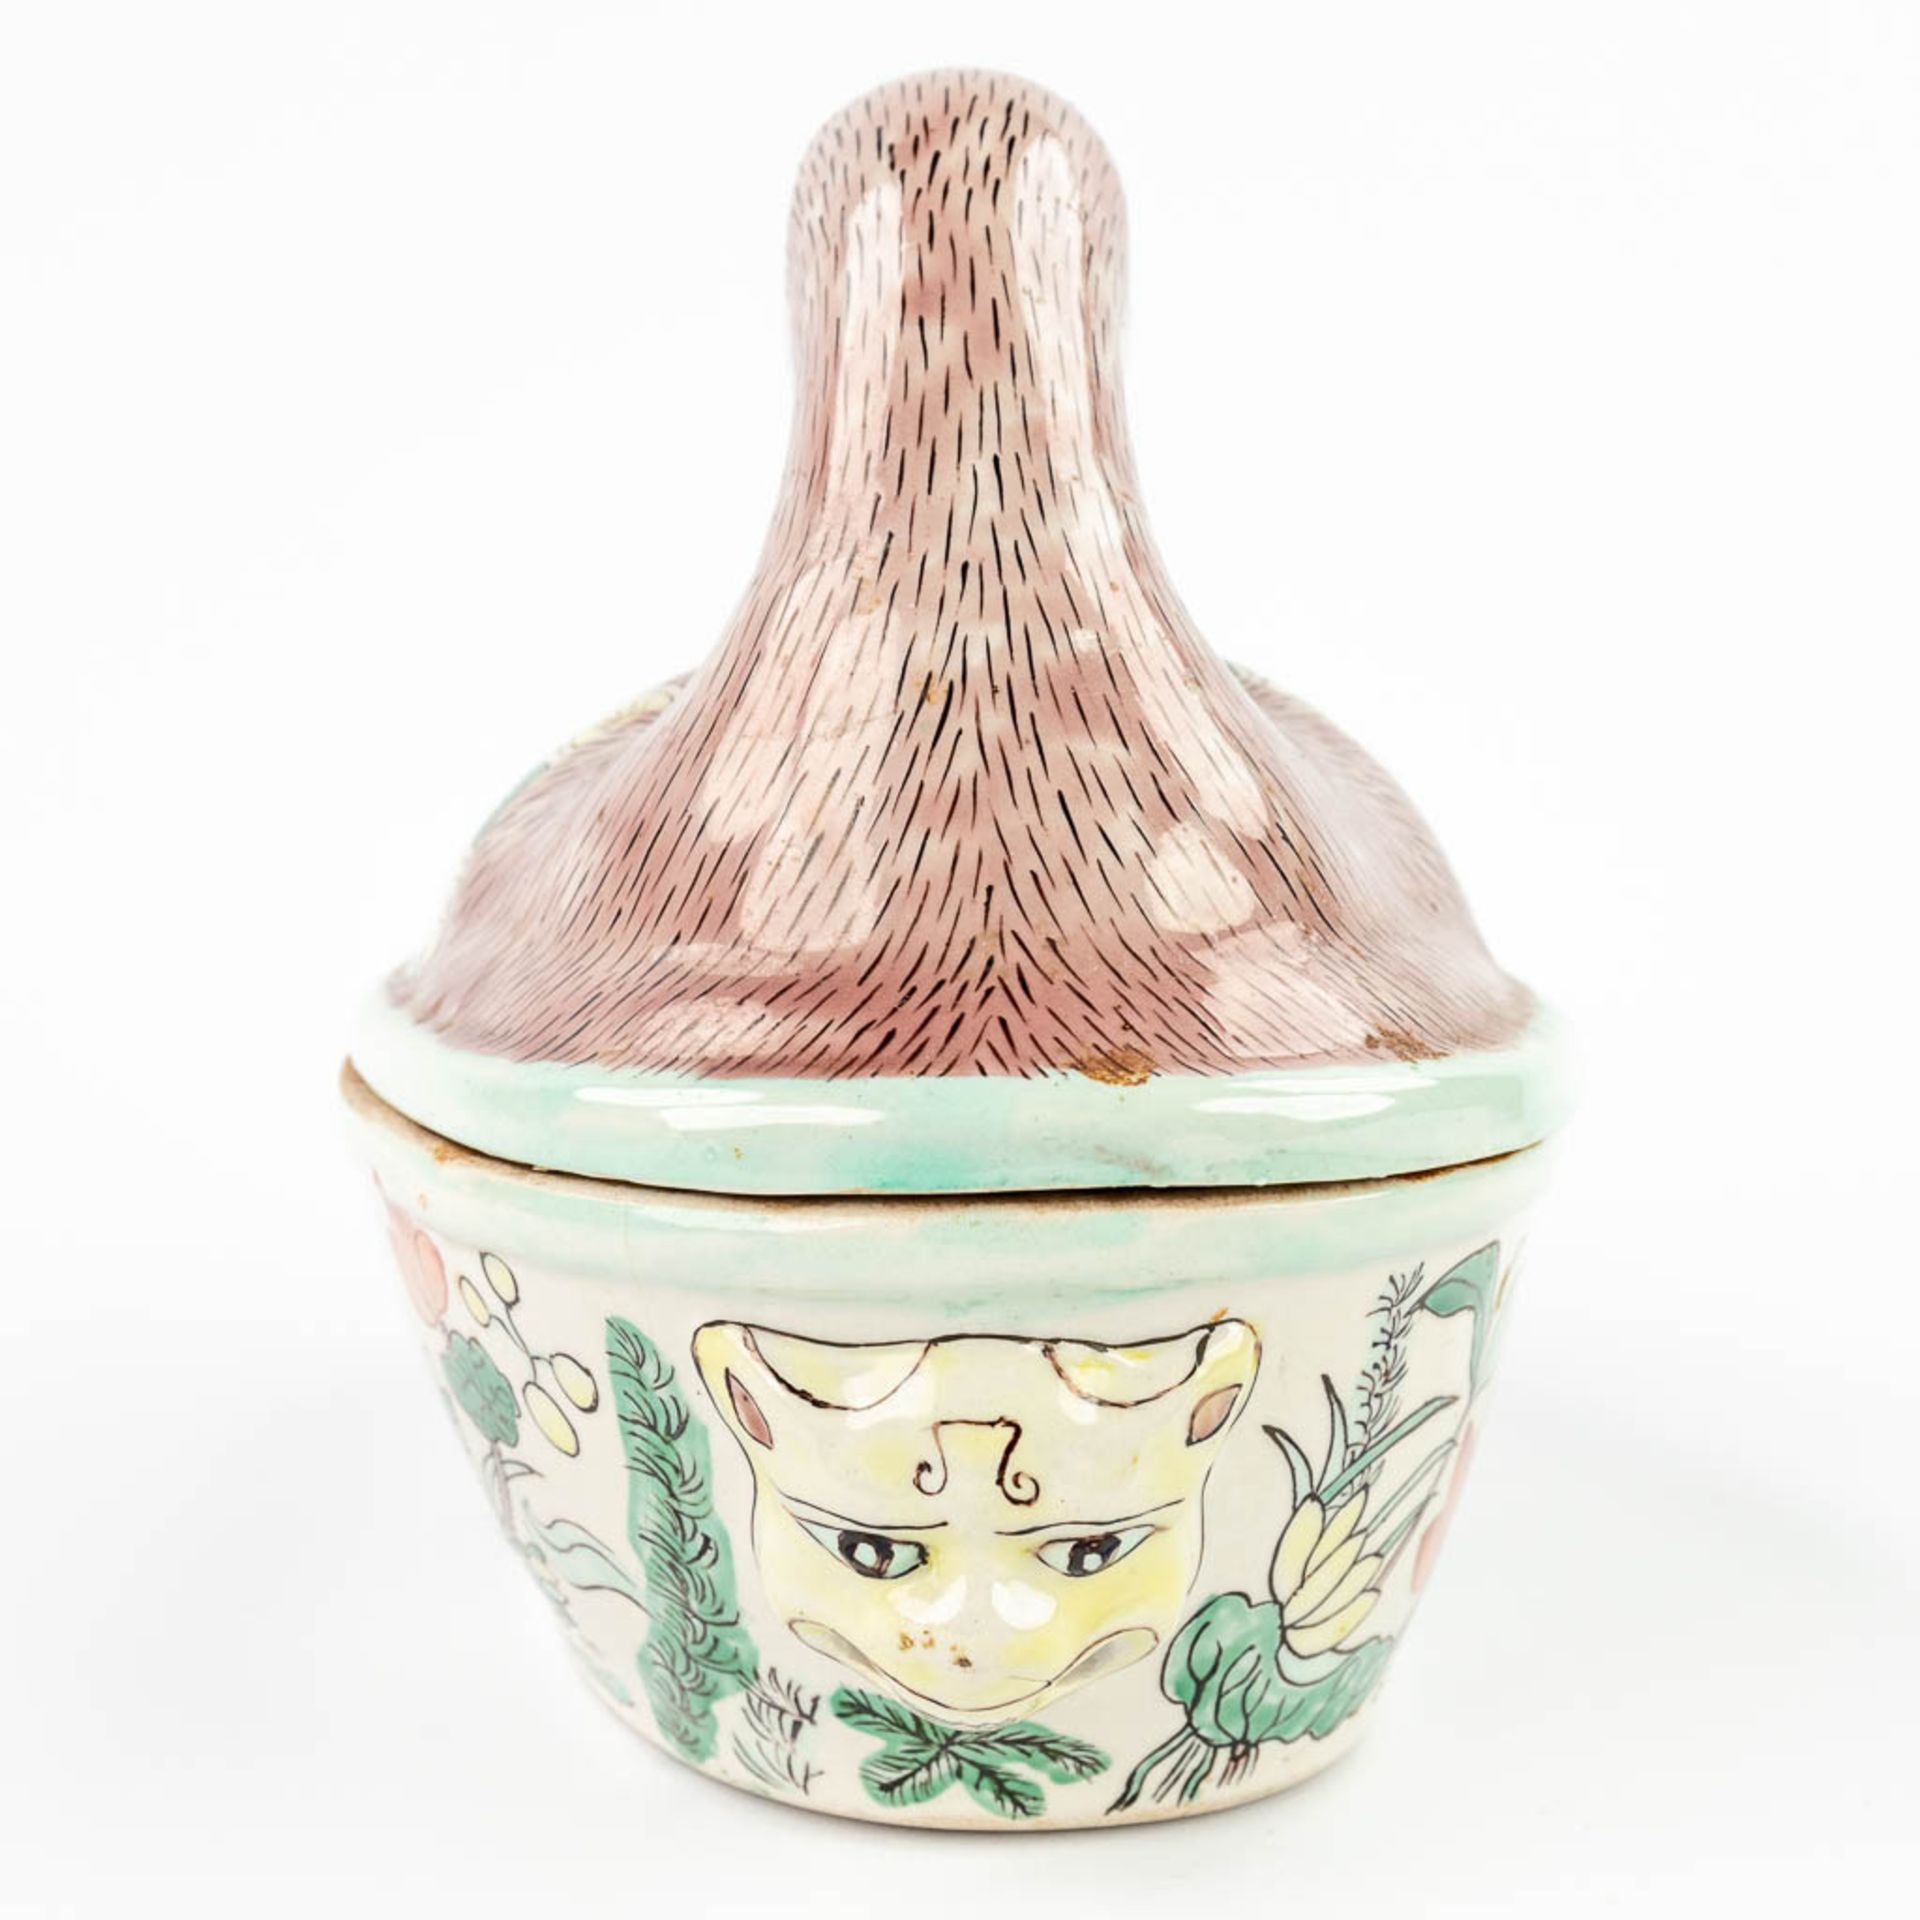 A figurative tureen in the shape of a duck, with hand-painted decor. (17 x 32 x 22cm) - Image 3 of 13